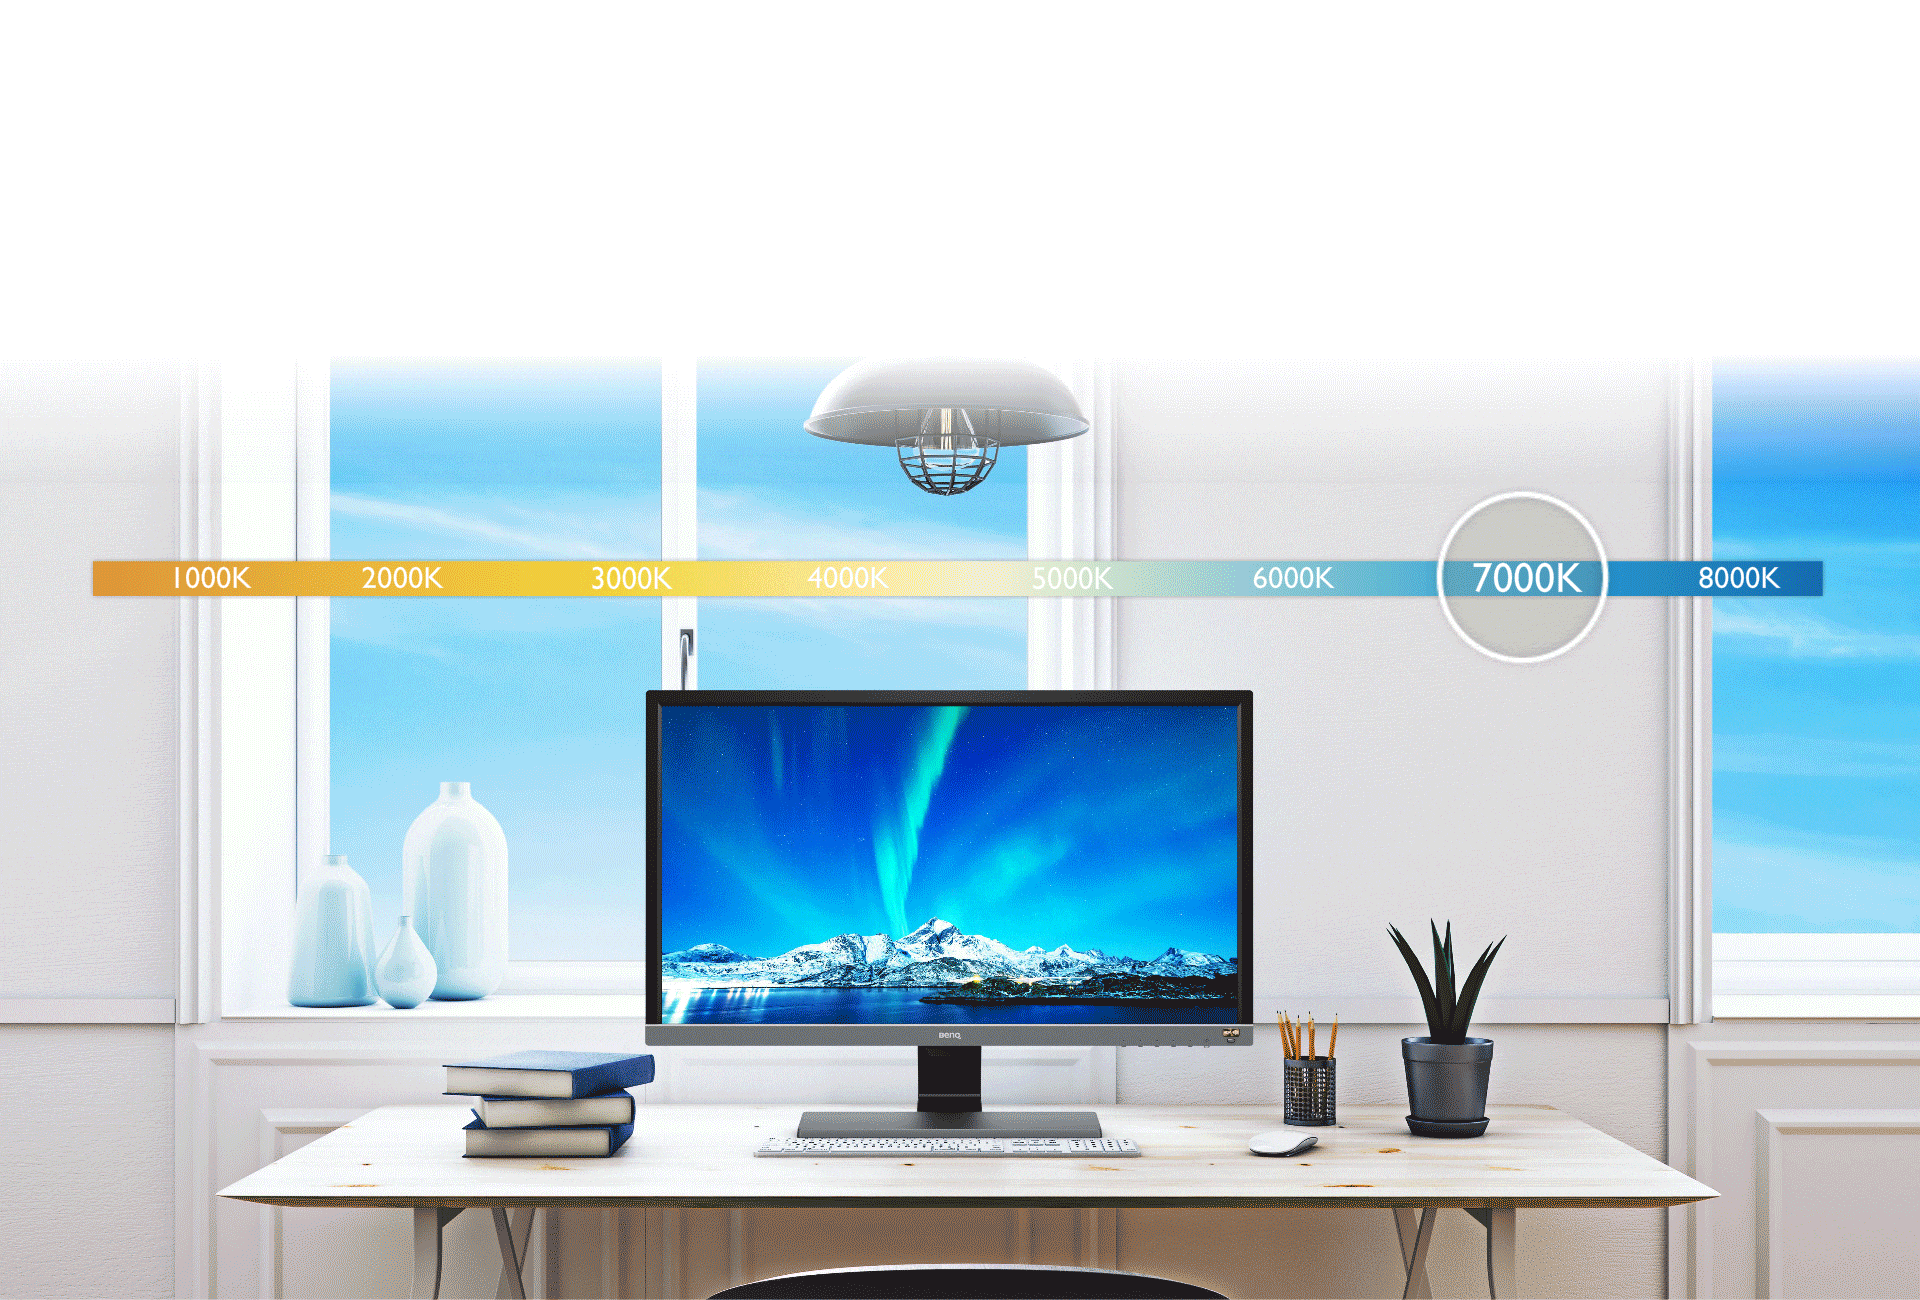 BenQ EW3280U 4K gaming monitor can automatically adjust on-screen brightness and color temperature to fit your surroundings.